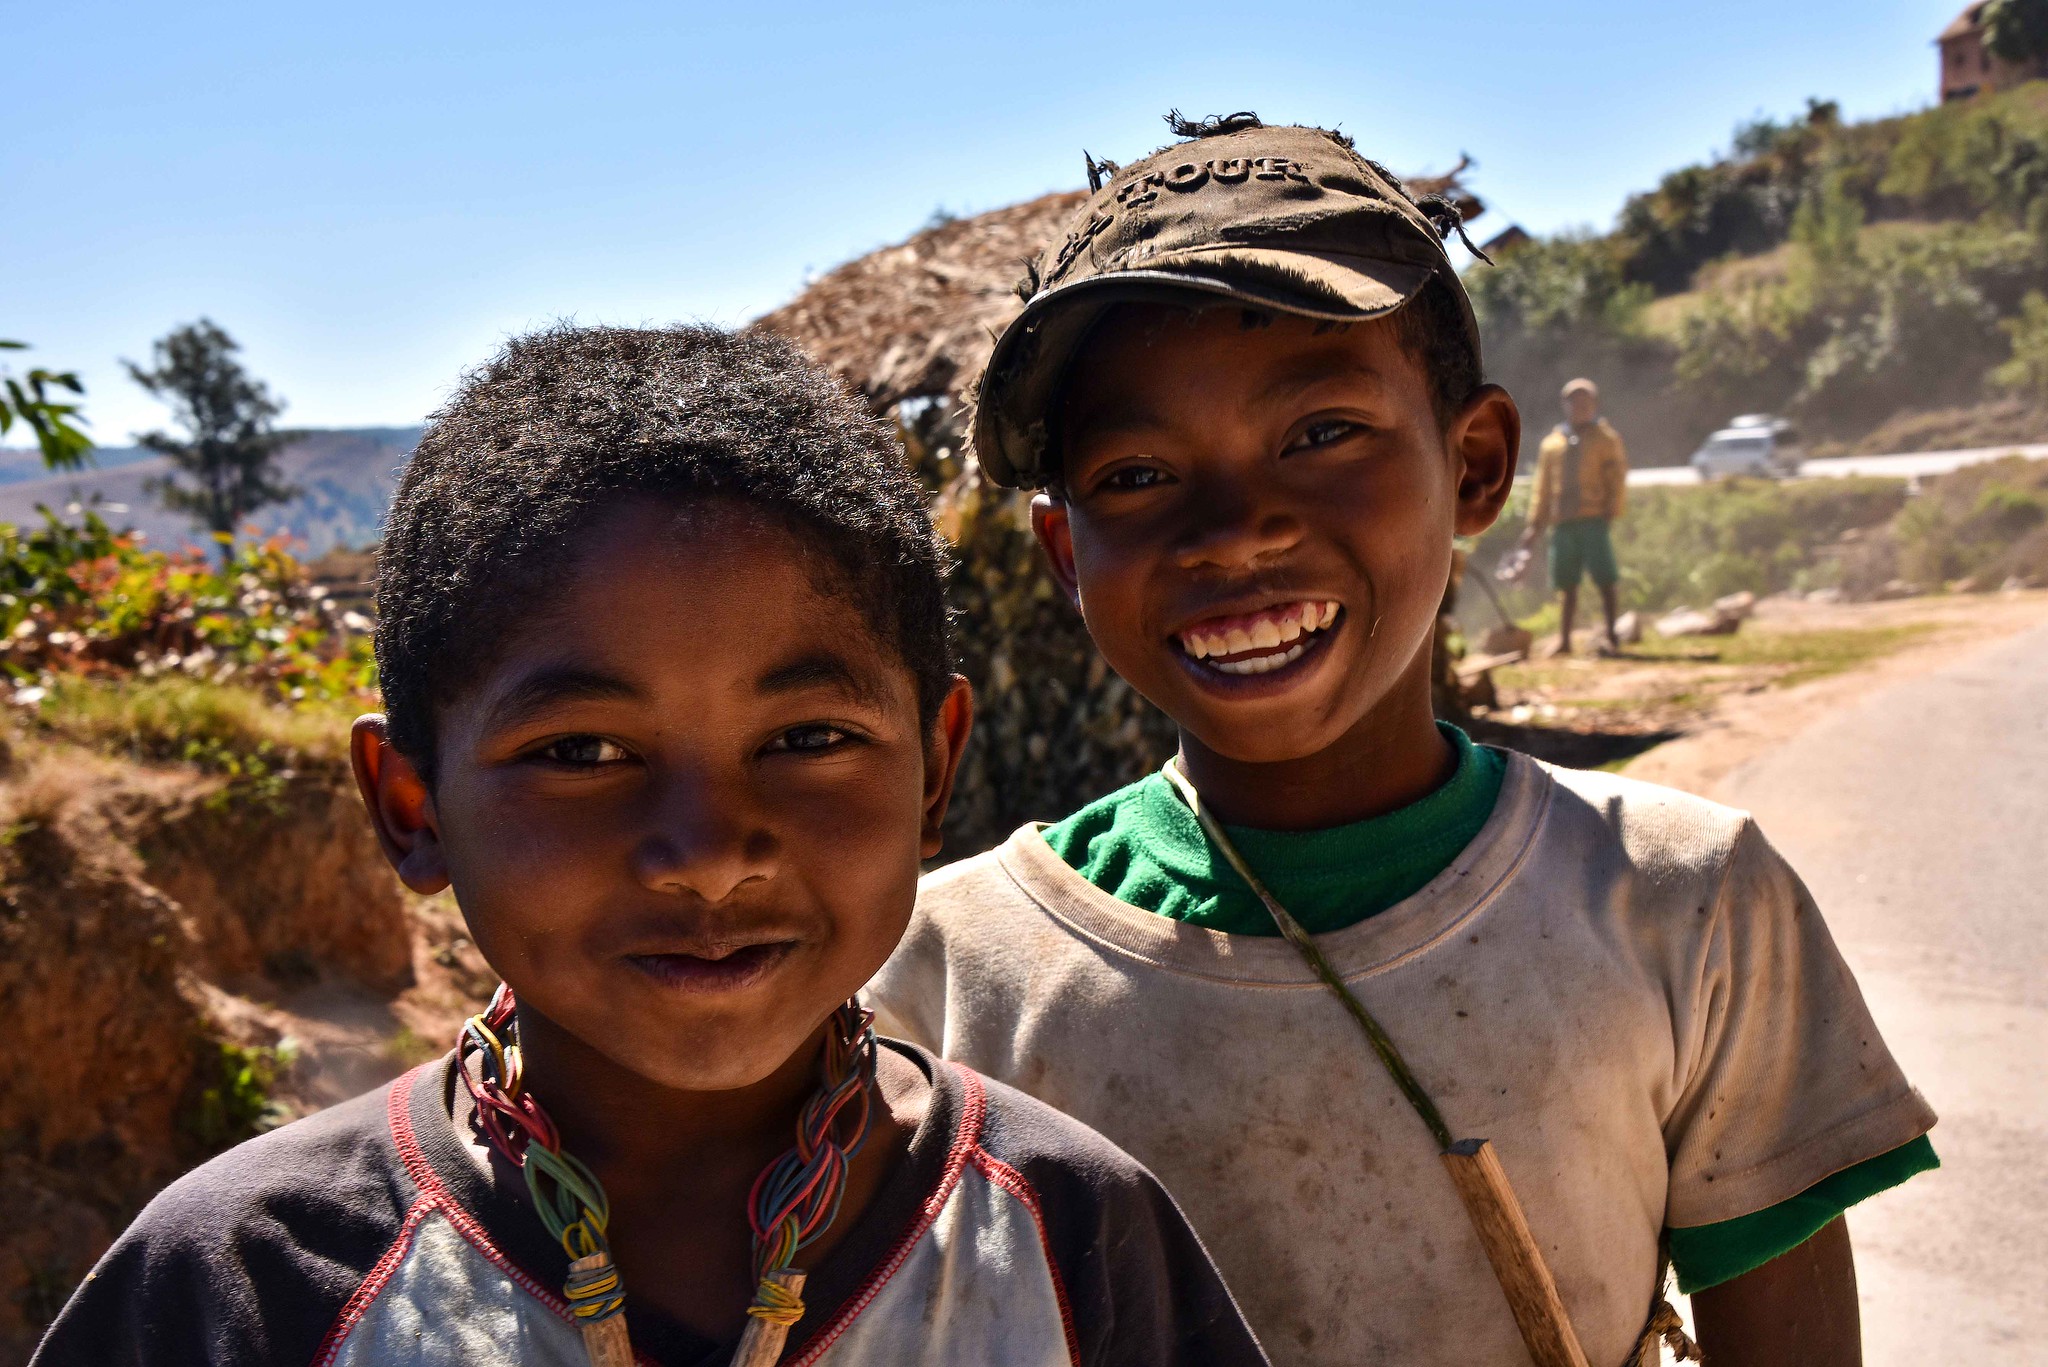 PICTURED: Two young Malagasy boys smile for the camera. The Malagasy are a genetically diverse people just as the lemurs they share the island with are. Photo credit Rod Waddington CC.2.0.